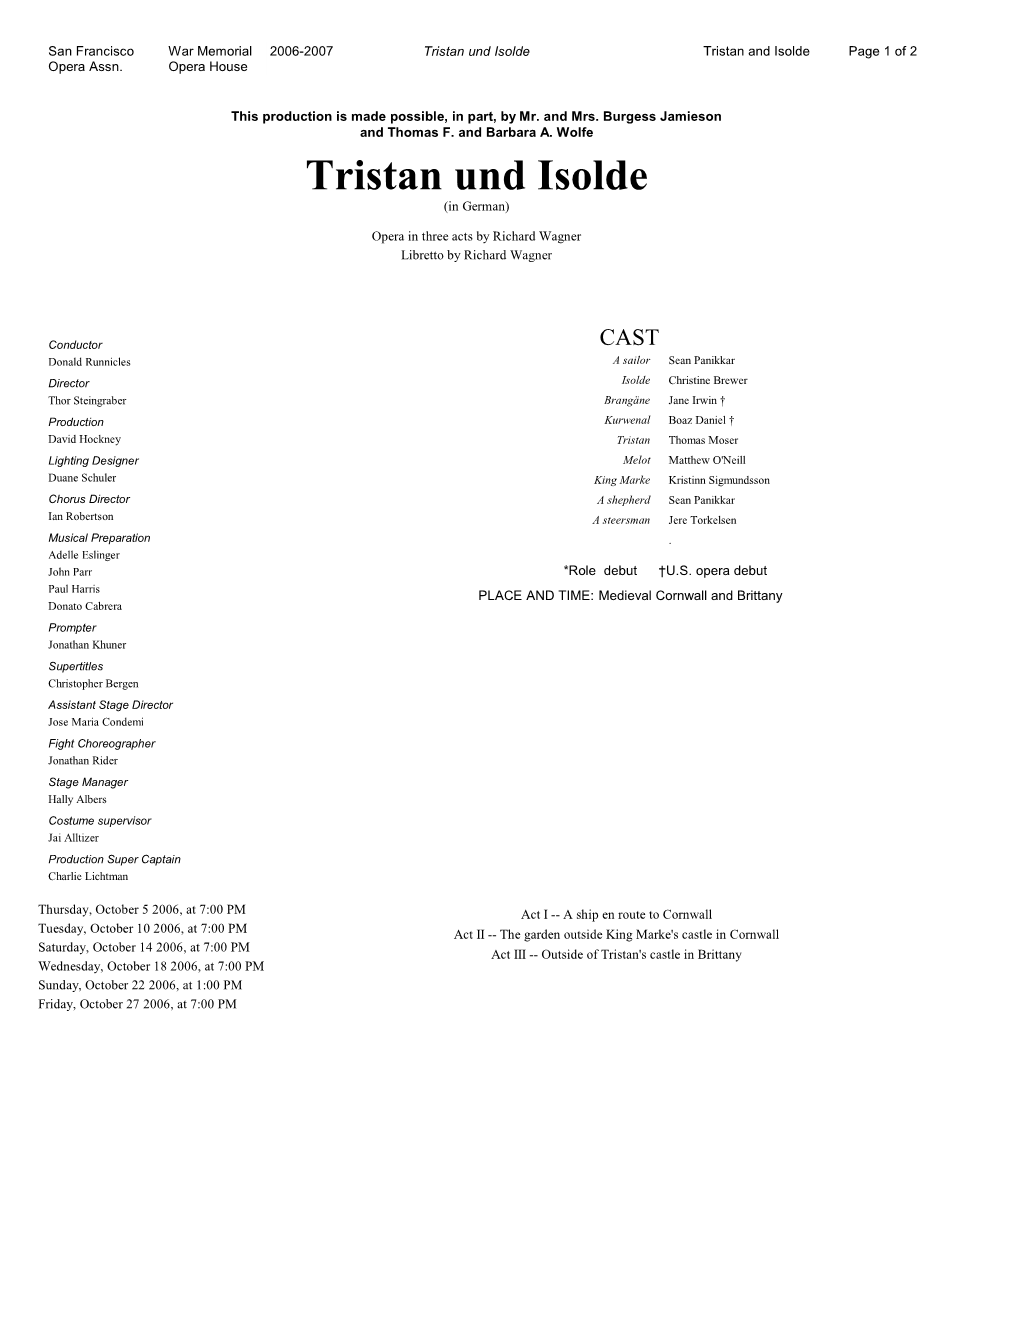 Tristan Und Isolde Tristan and Isolde Page 1 of 2 Opera Assn